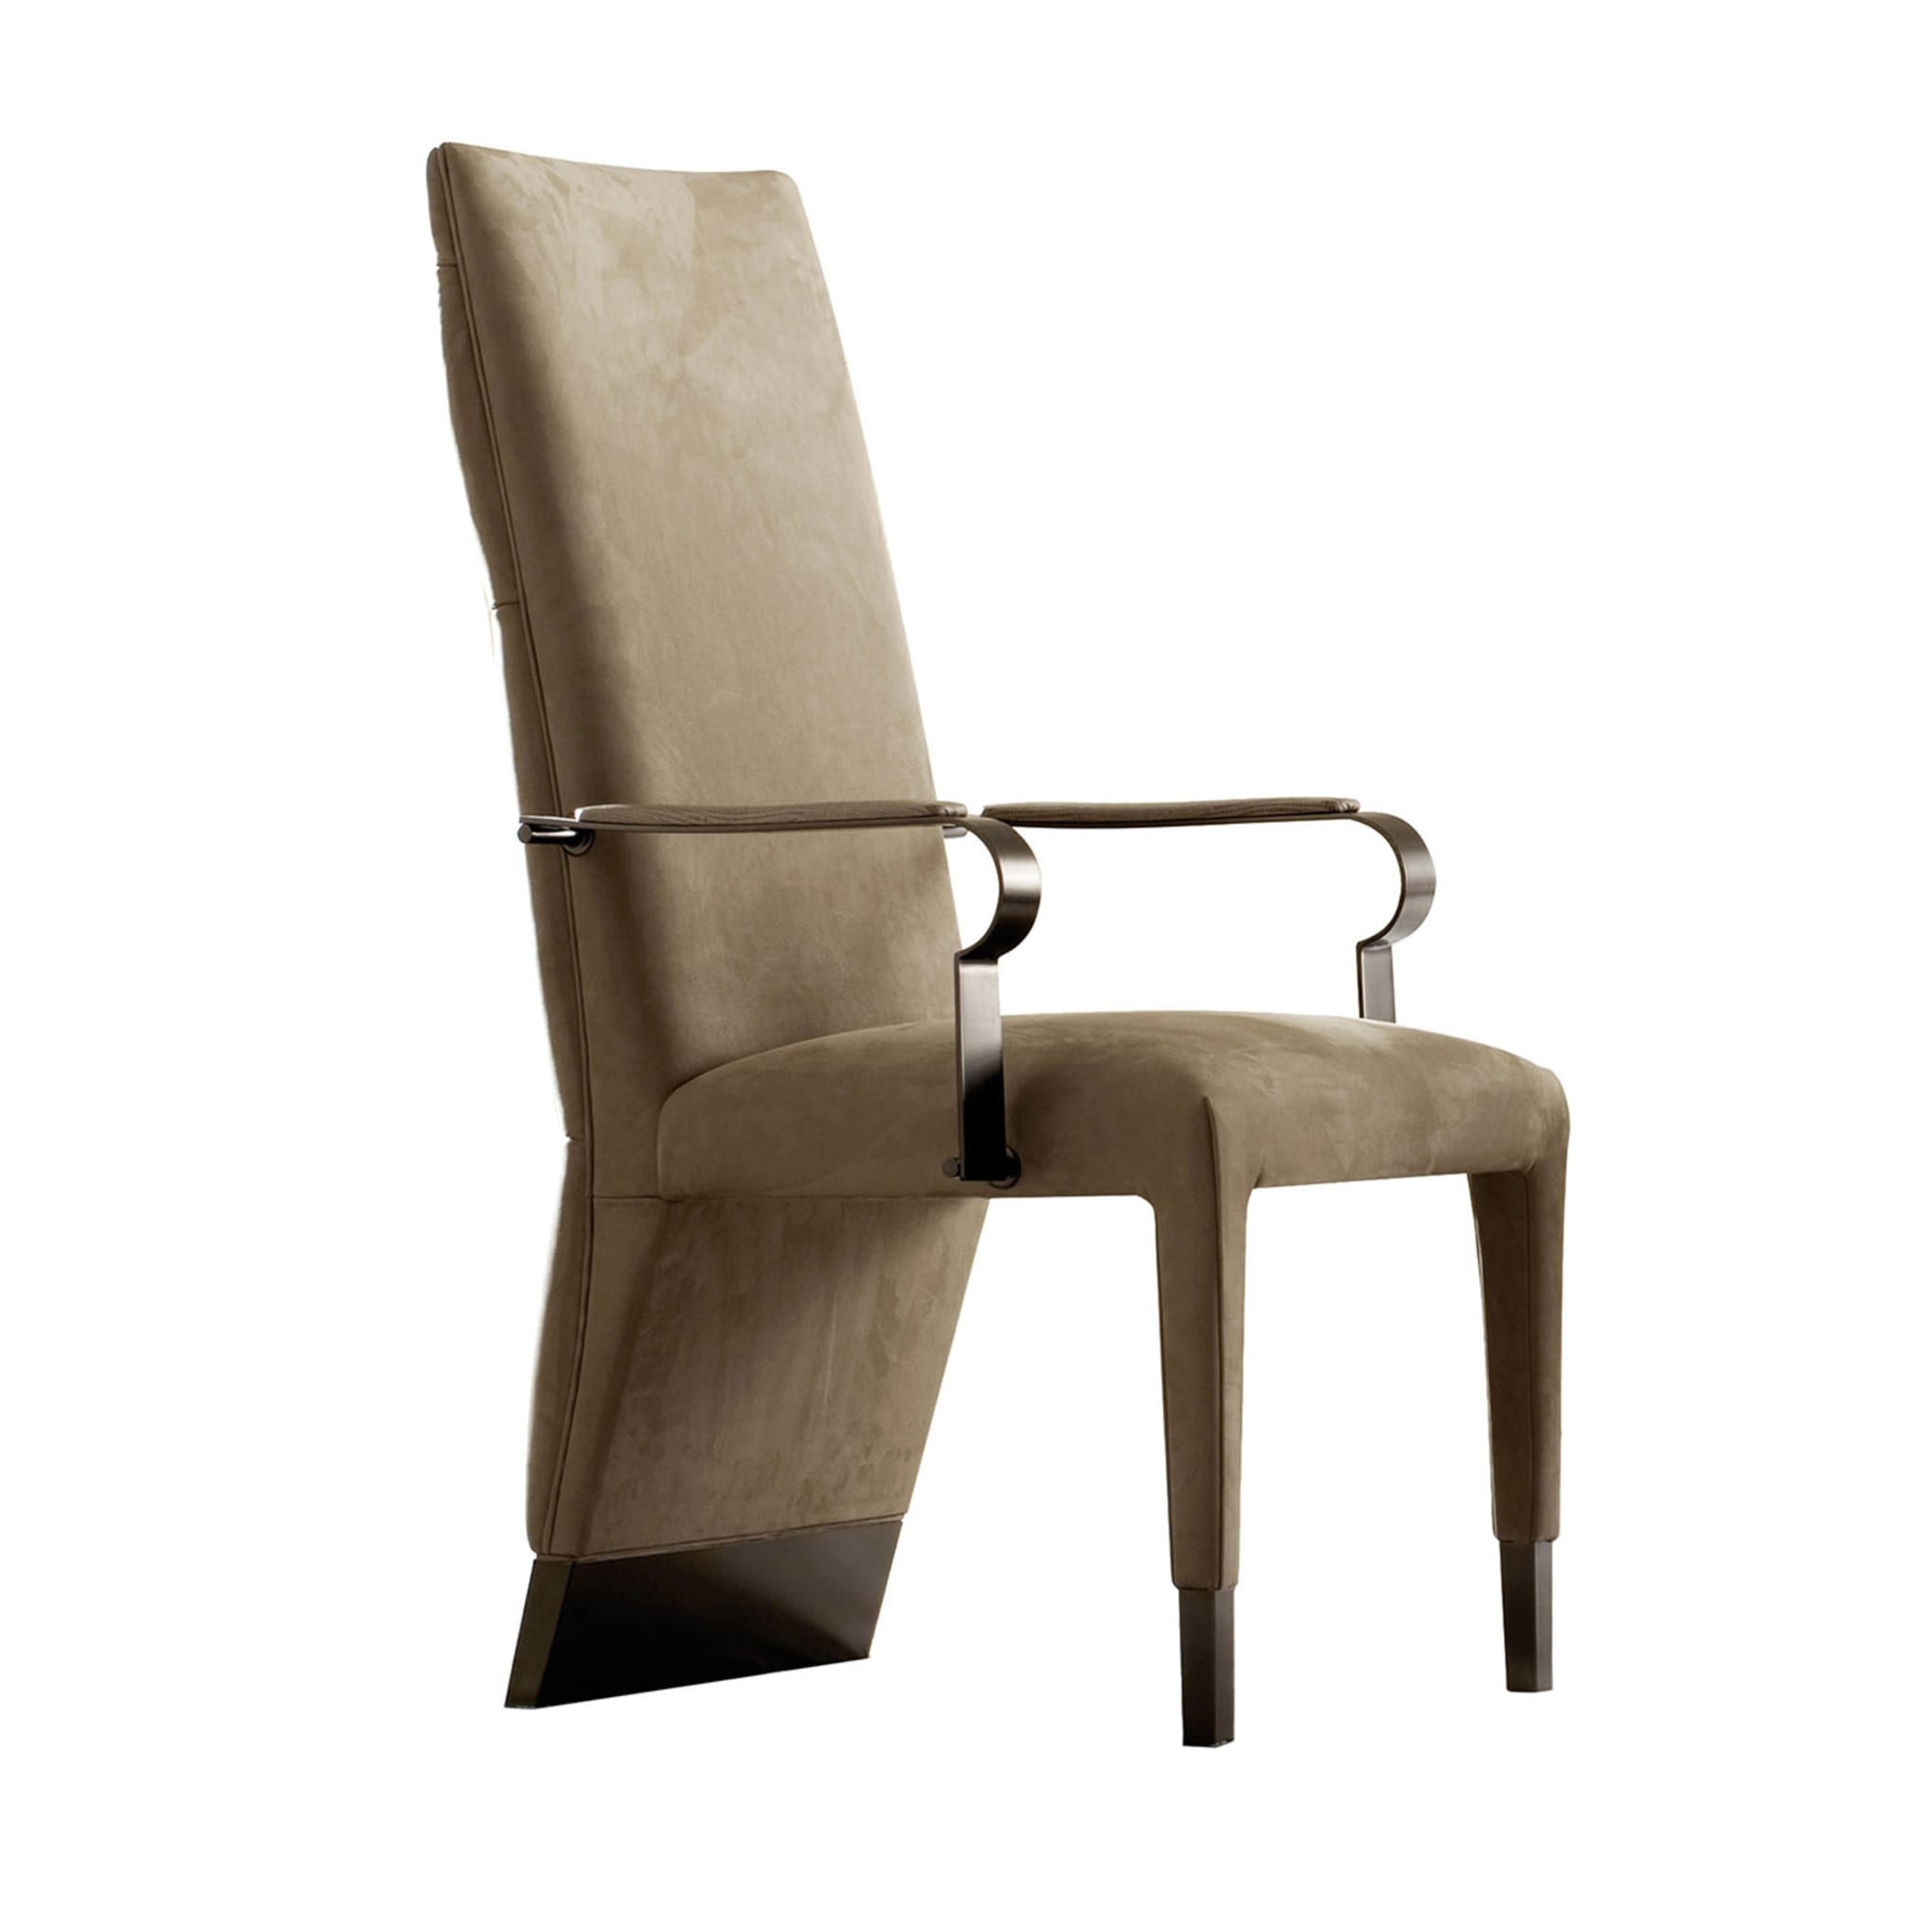 Cappuccino Nabuk Chair with Armrests - Main view